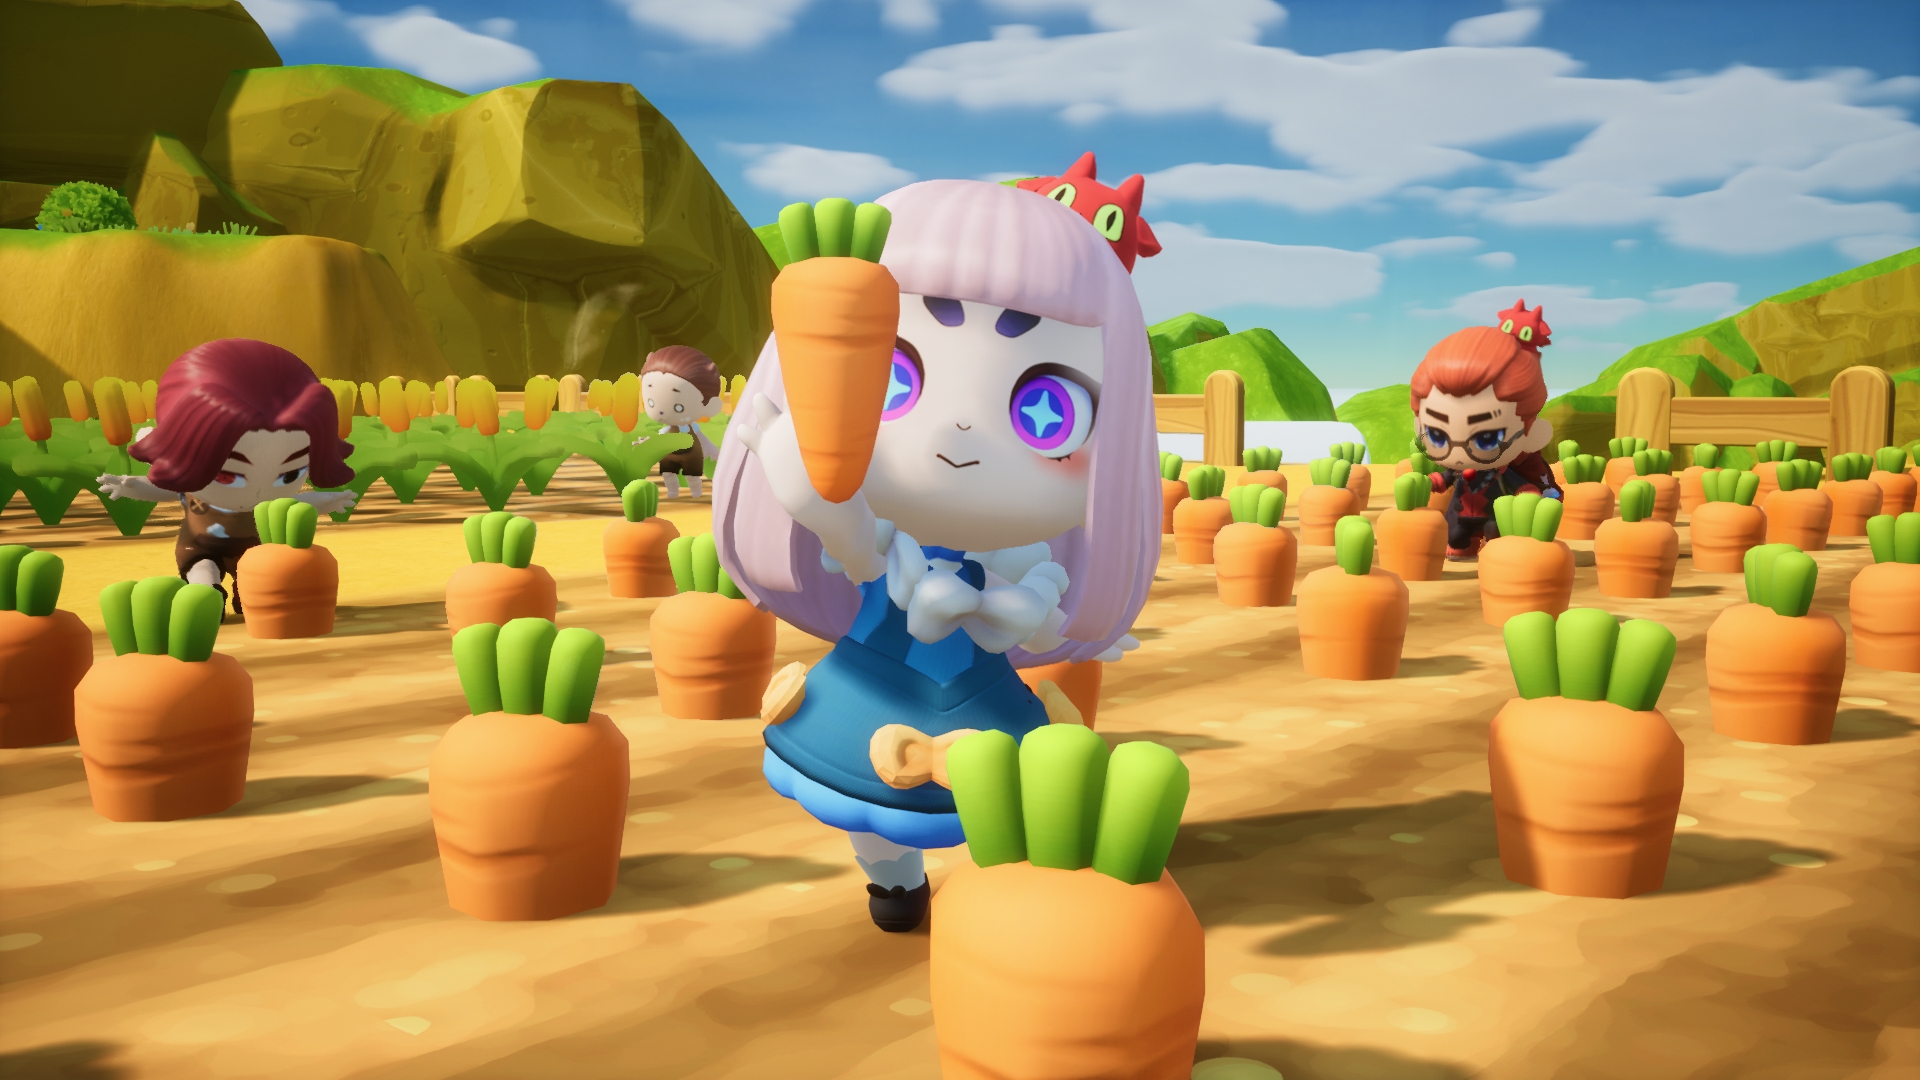 Happy Tomato's kawaii life simulator lets players create Utokers to explore, farm, and socialize with friends.